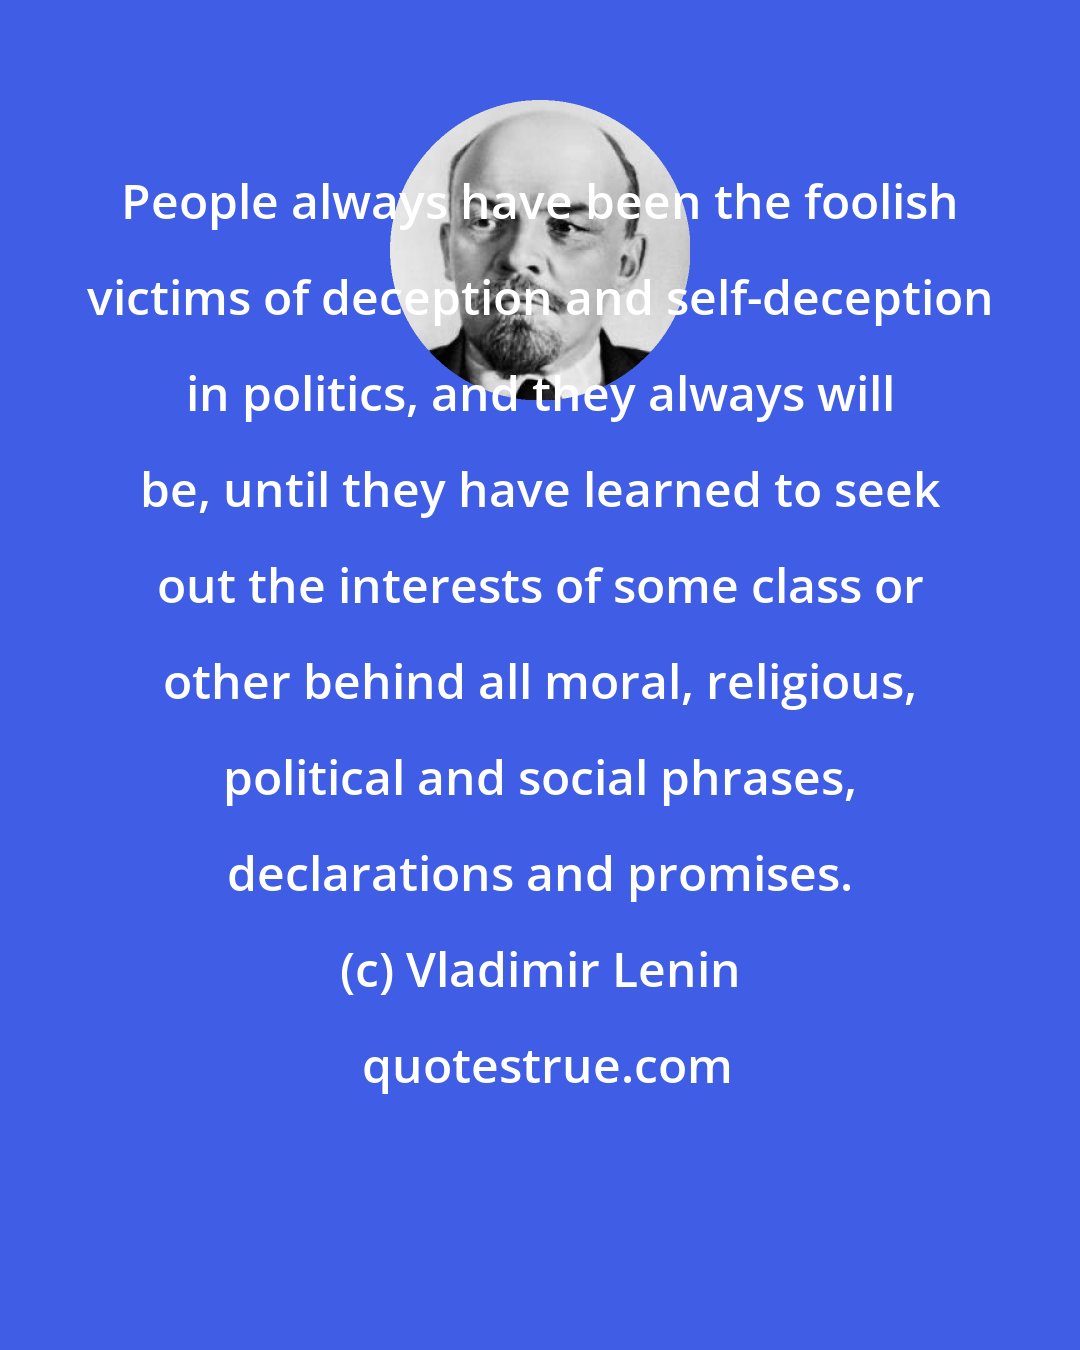 Vladimir Lenin: People always have been the foolish victims of deception and self-deception in politics, and they always will be, until they have learned to seek out the interests of some class or other behind all moral, religious, political and social phrases, declarations and promises.